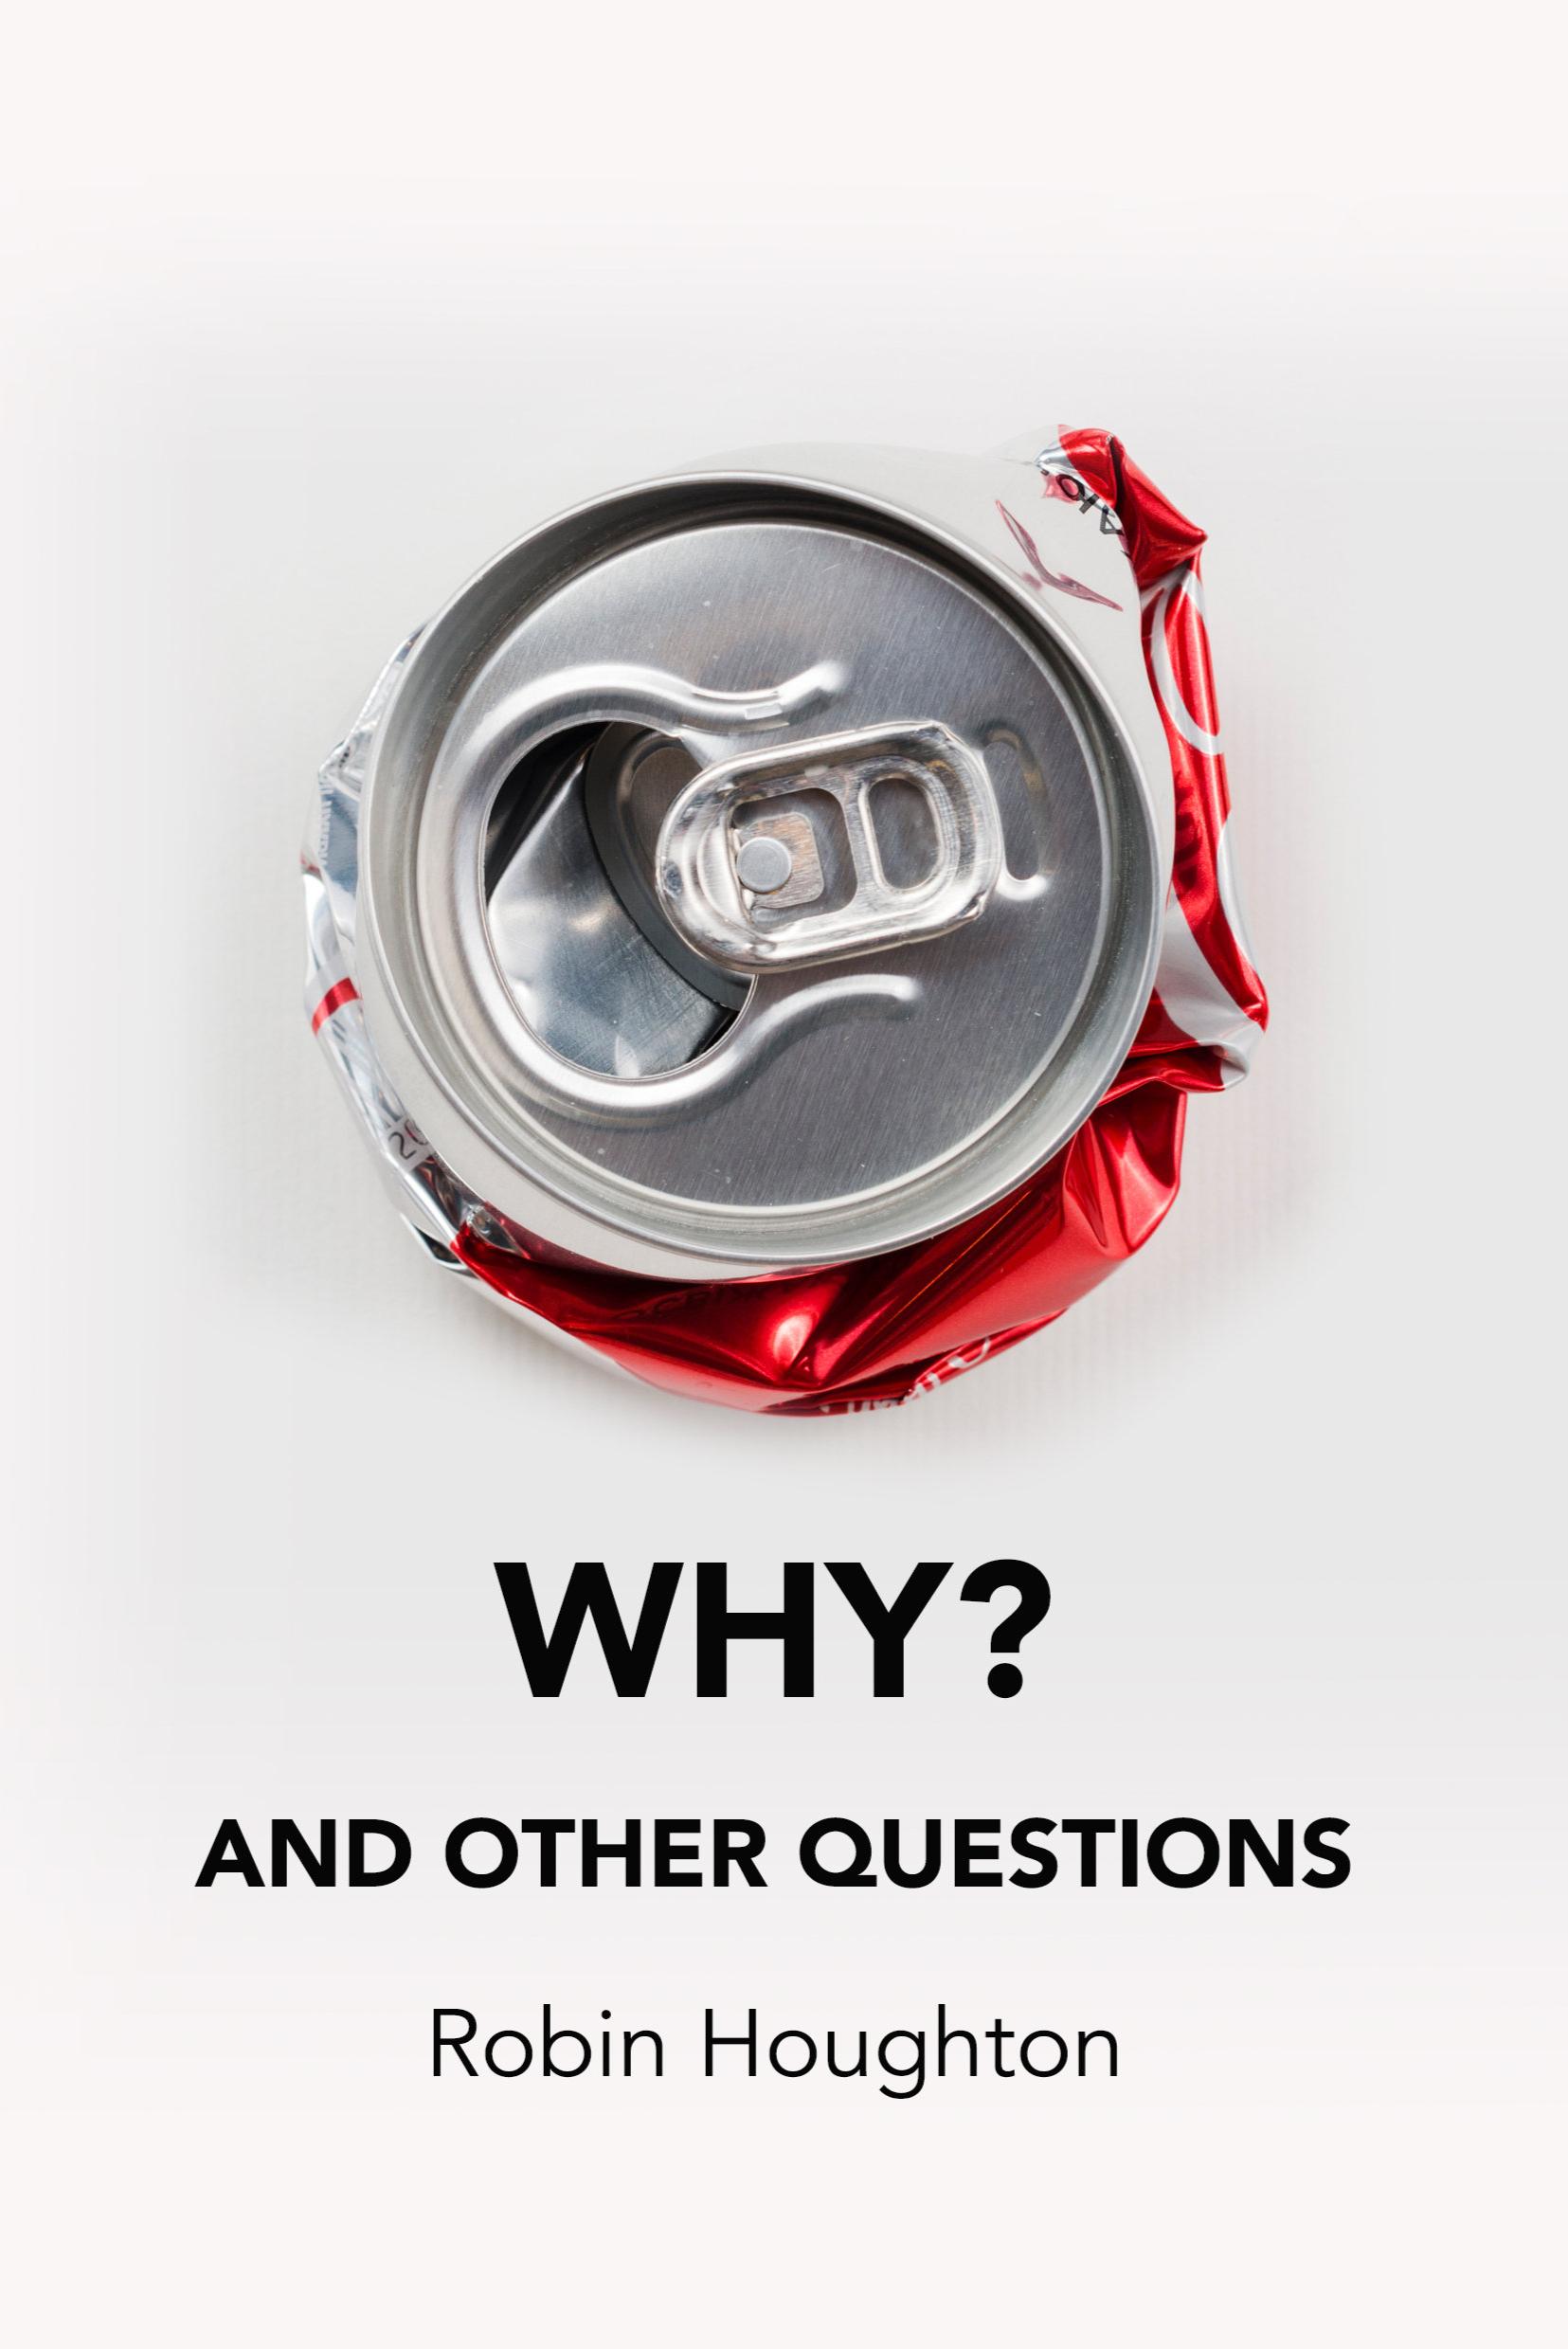 Book cover of Why? And other questions by robinhoughton